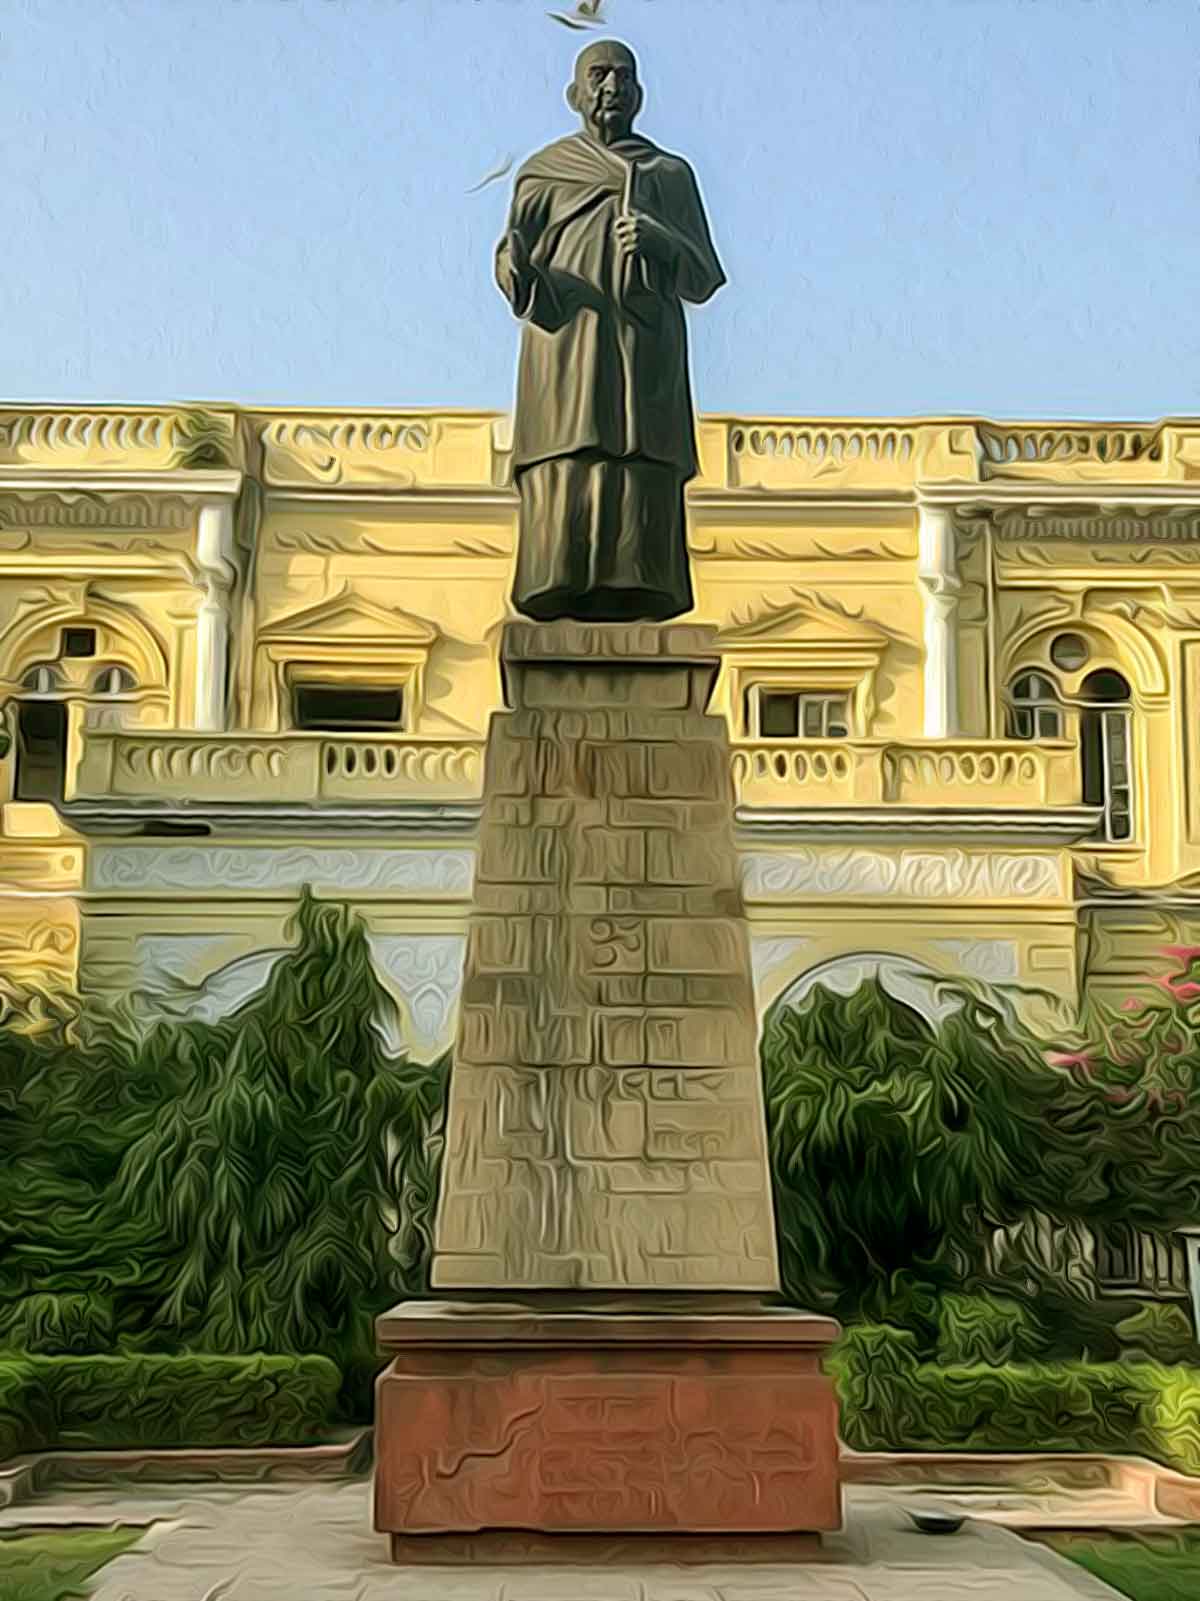 Ghantaghar-Statue of Swami Shraddhanand. Ghantaghar is situated in Chandni Chowk, Delhi, India. The literal meaning of Ghantaghar is a clock tower and the tower was built in 1870.